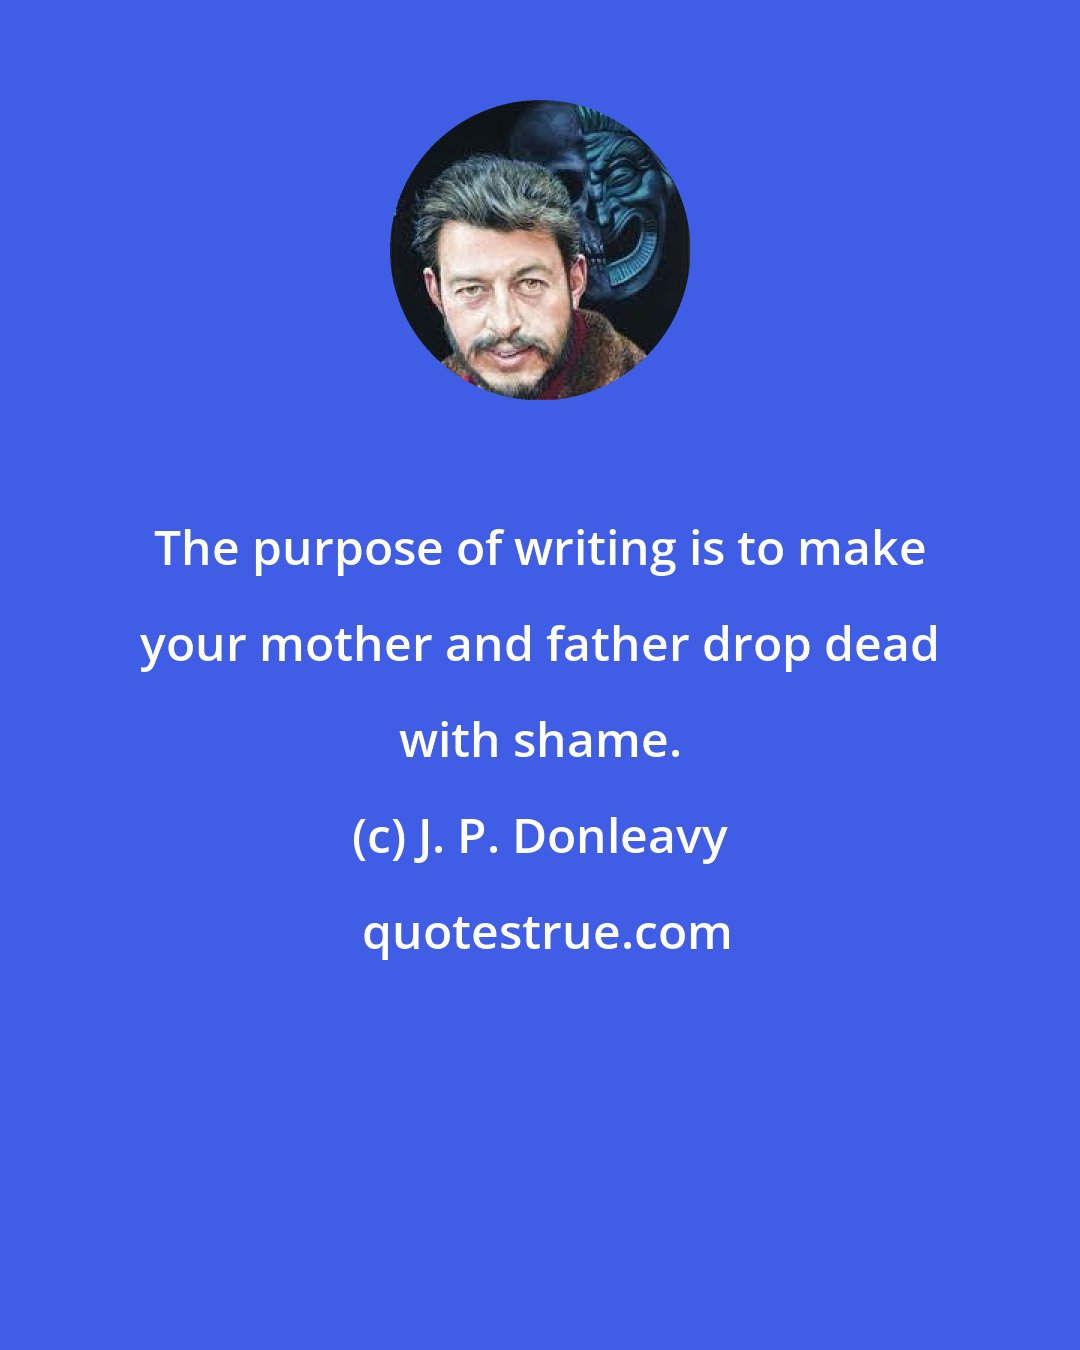 J. P. Donleavy: The purpose of writing is to make your mother and father drop dead with shame.